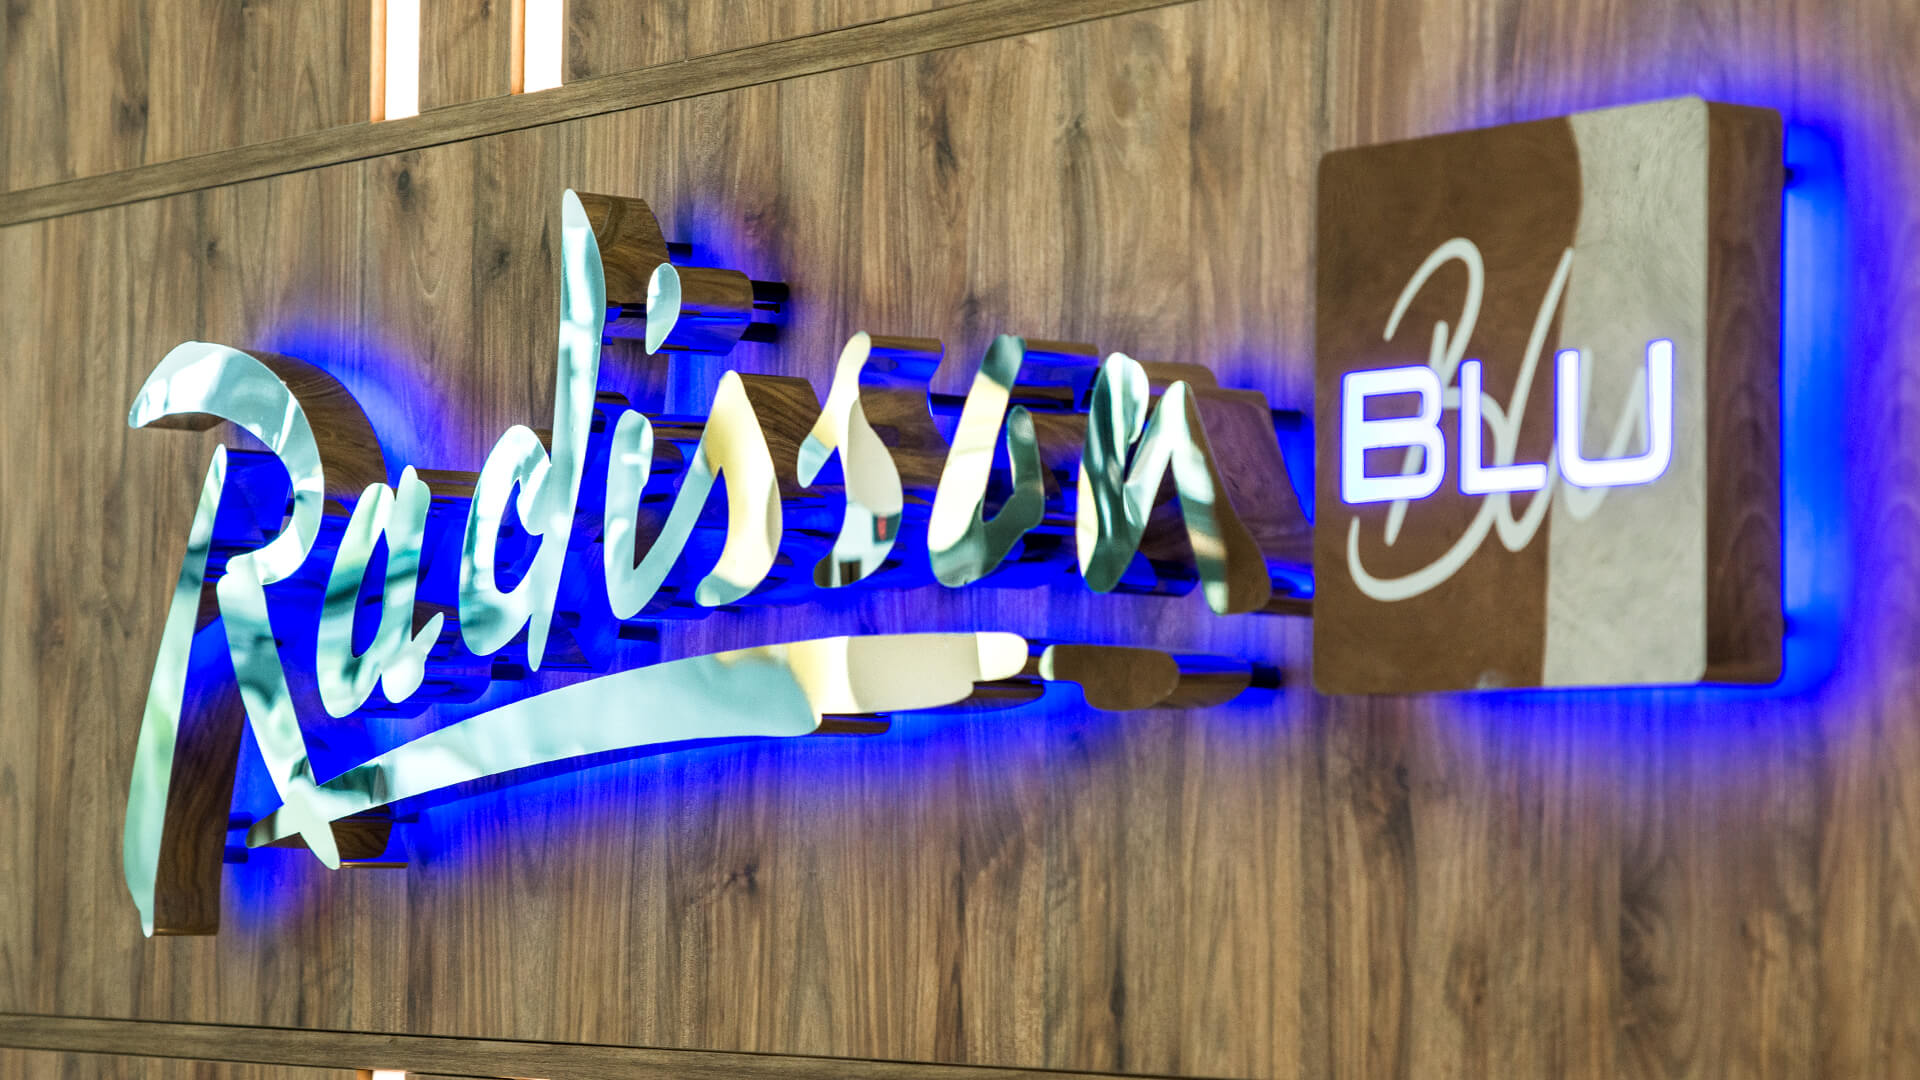 Radisson Sopot blu hotel - radisson-blue-letters-in-stainless-steel-literal-lettering-behind-reception-in-hotel-on-a-wood-wall-literal-lettering-literal-illuminated-from-behind-on-blue-sopot-logo-firm-literal-lettering-exclusive-glamour